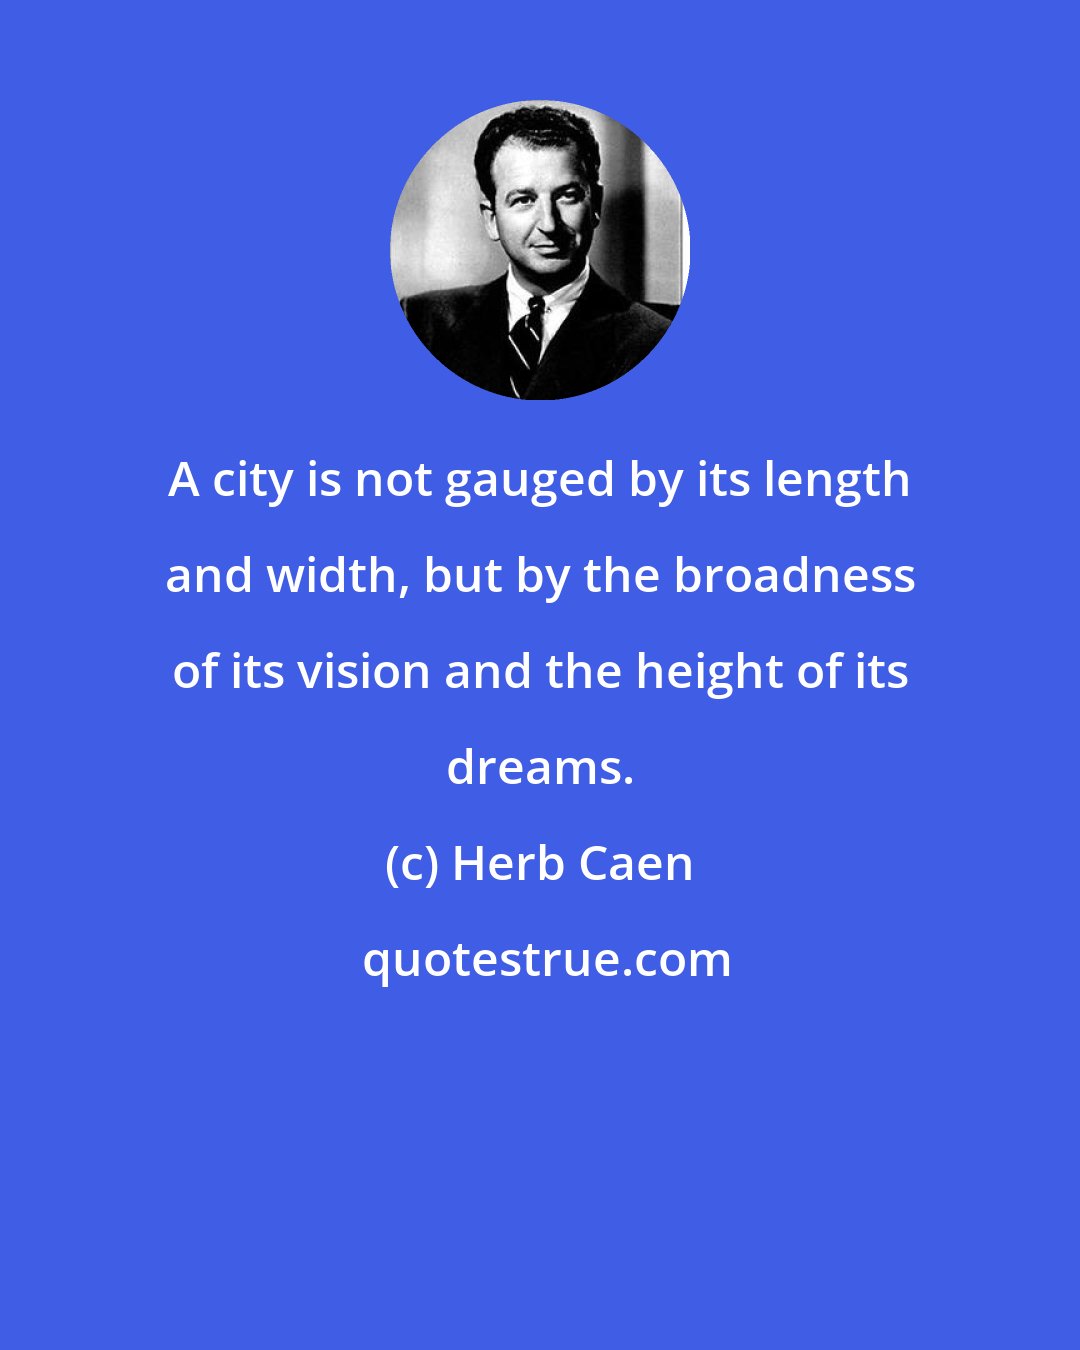 Herb Caen: A city is not gauged by its length and width, but by the broadness of its vision and the height of its dreams.